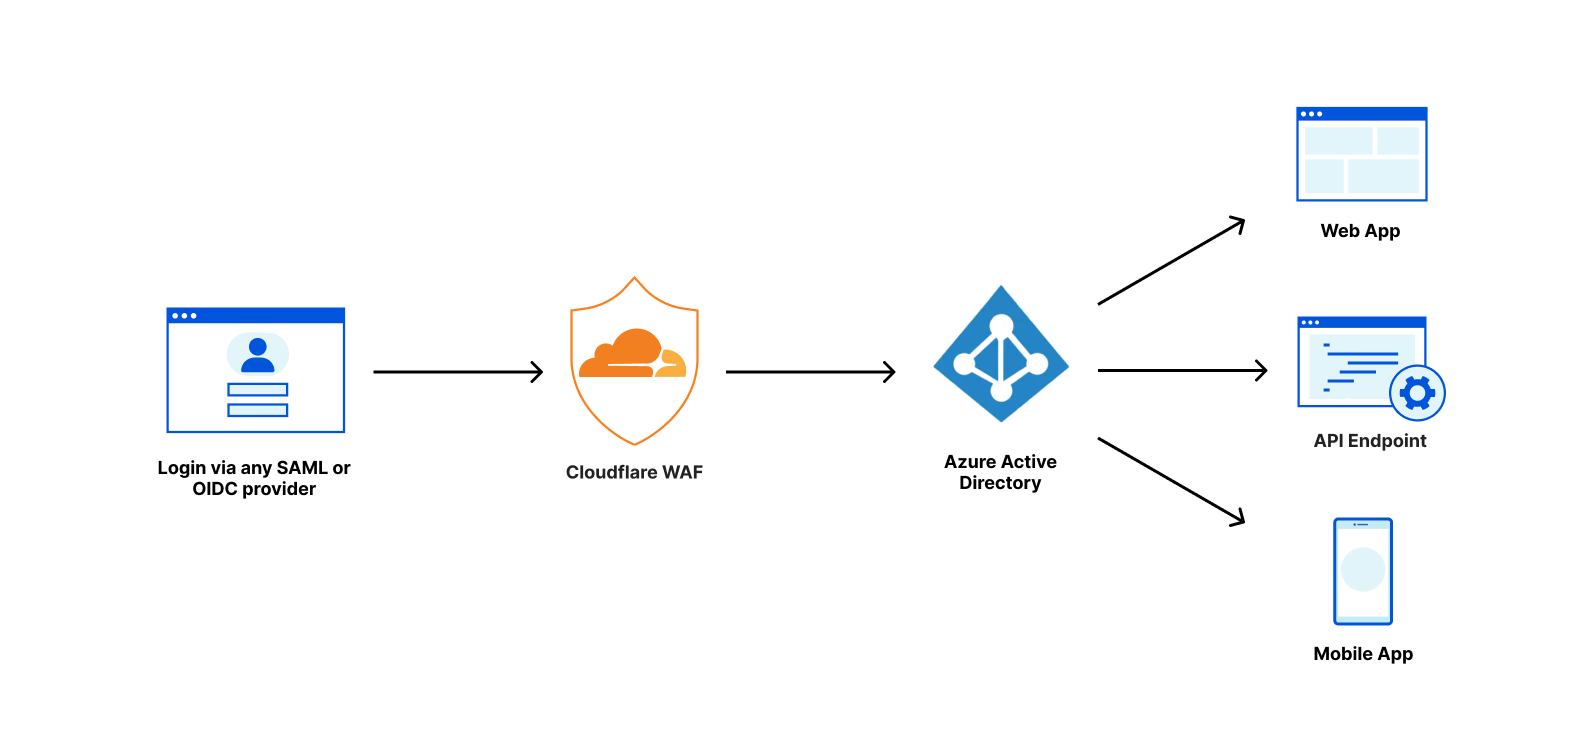 How Prisma saved 98% on distribution costs with Cloudflare R2